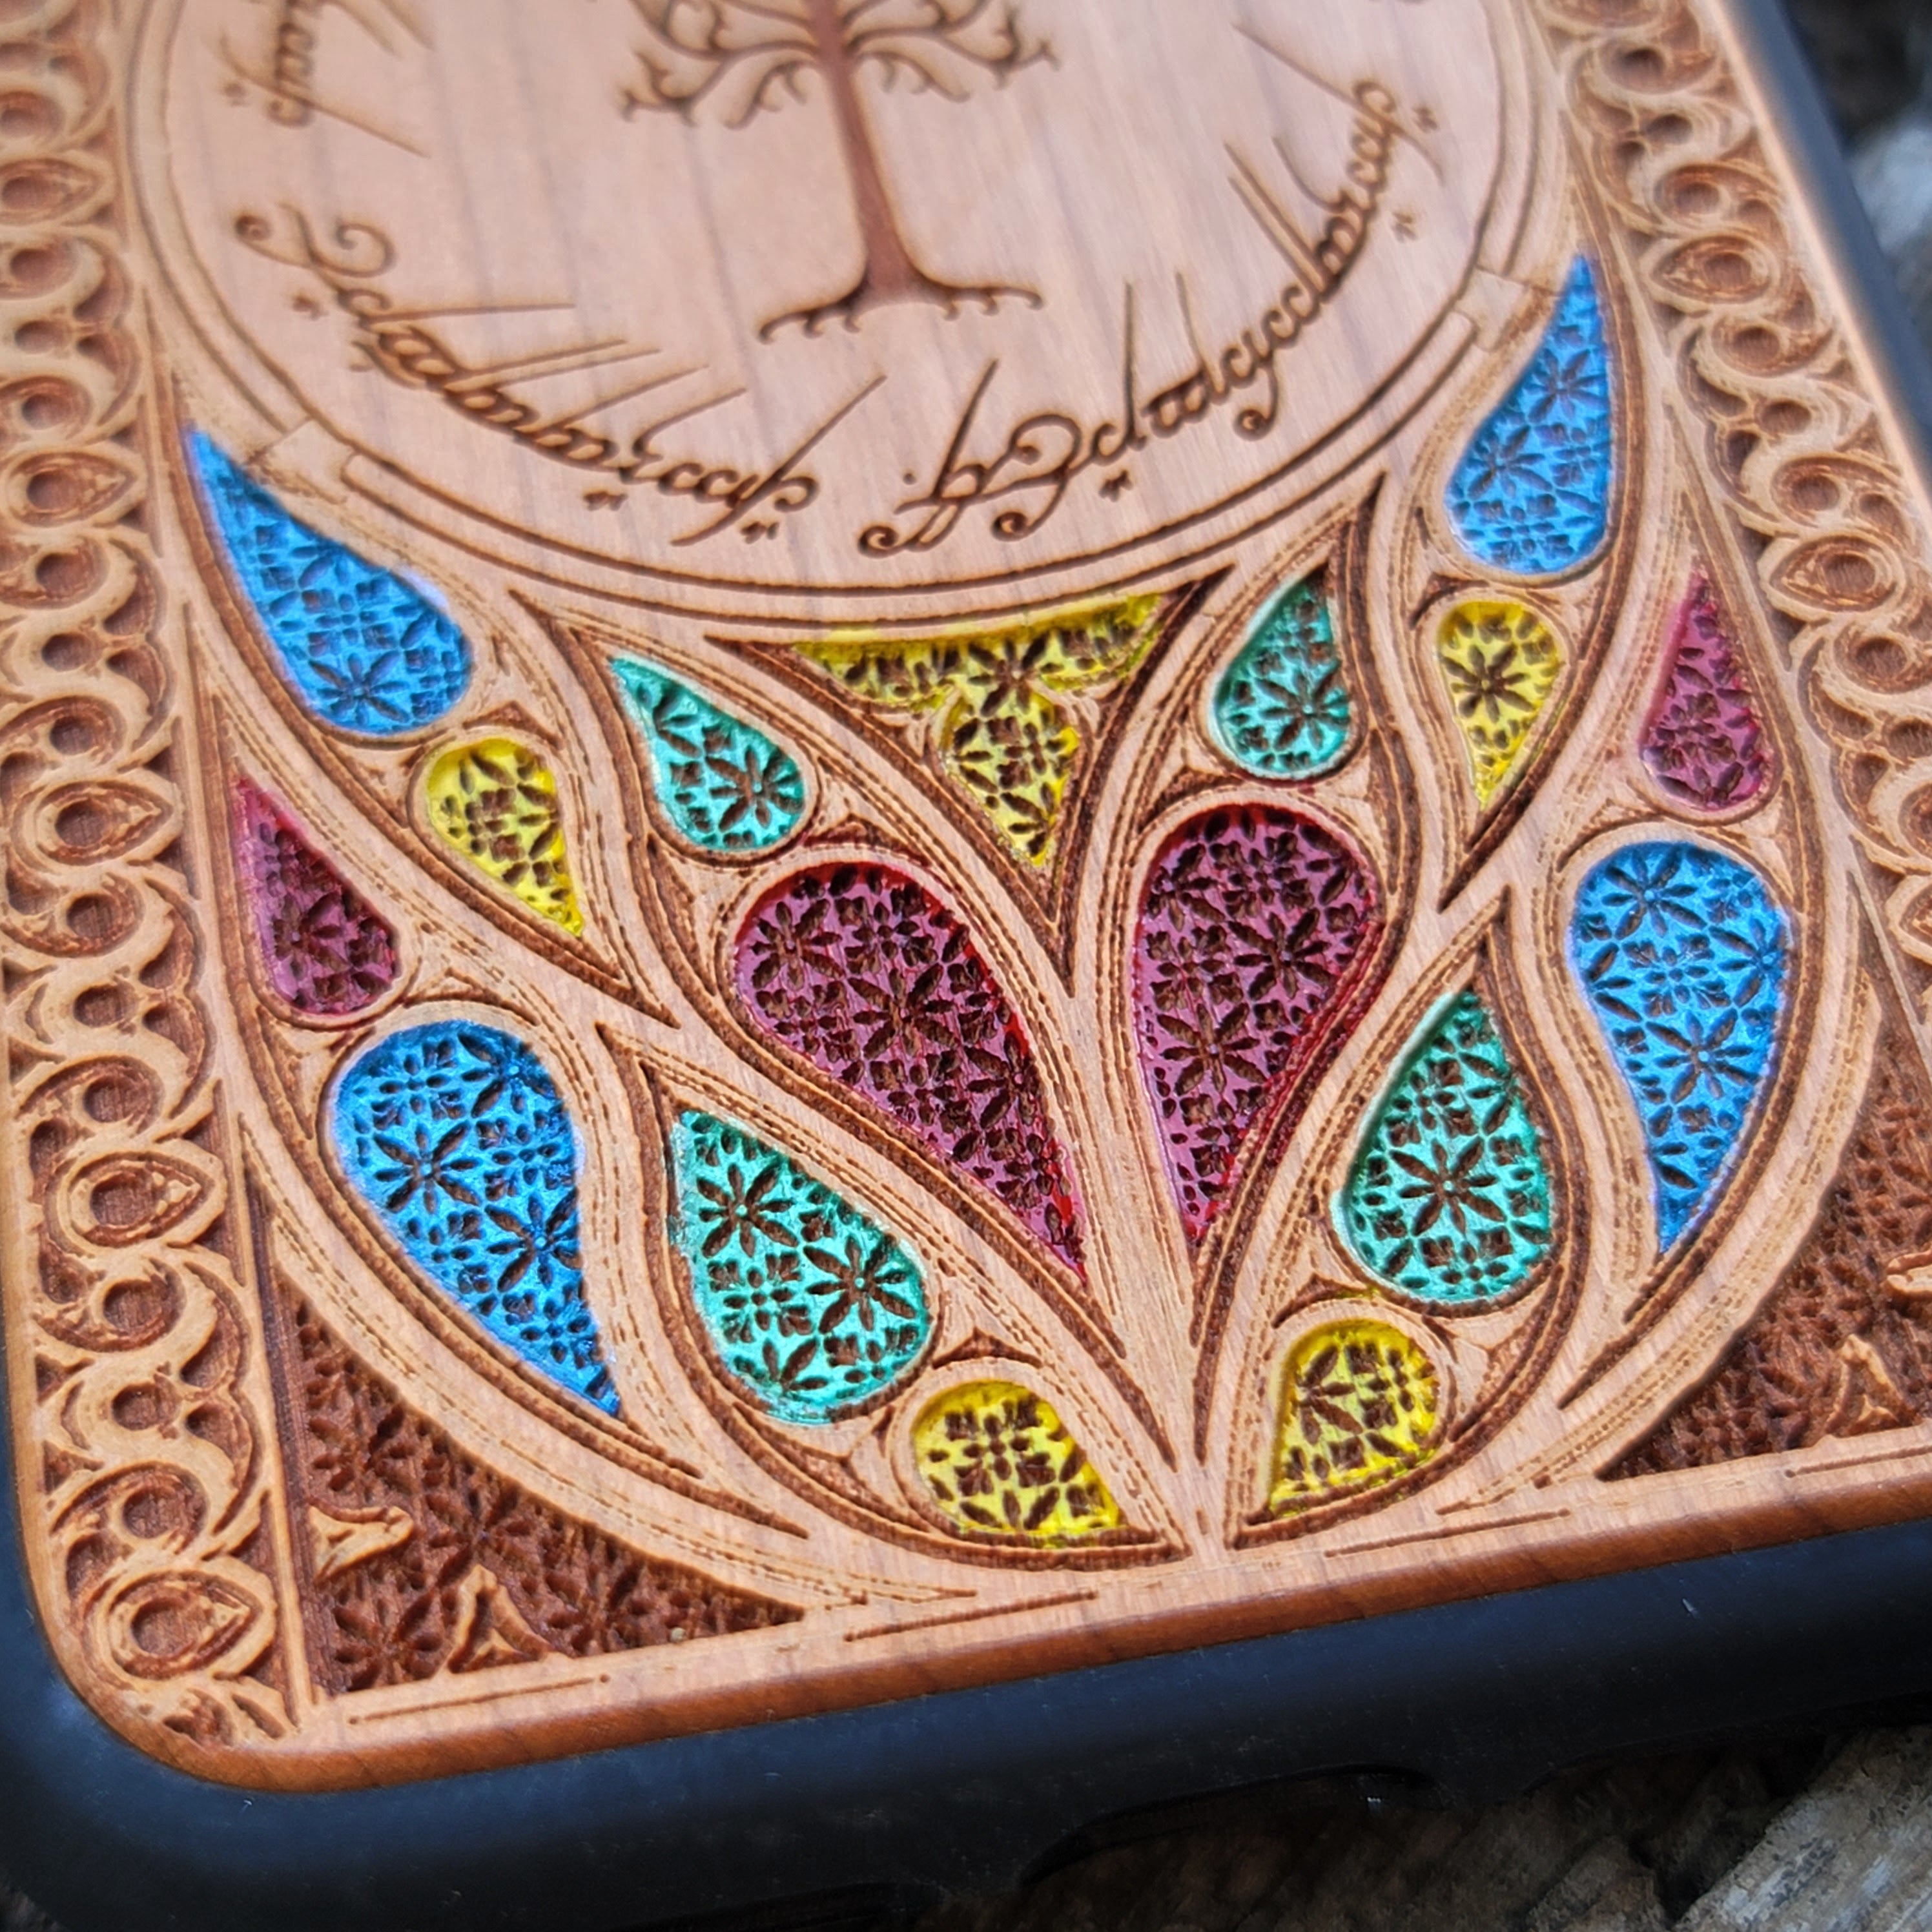 Wood Phone Case - Gothic Pattern Design VI Hand Painted